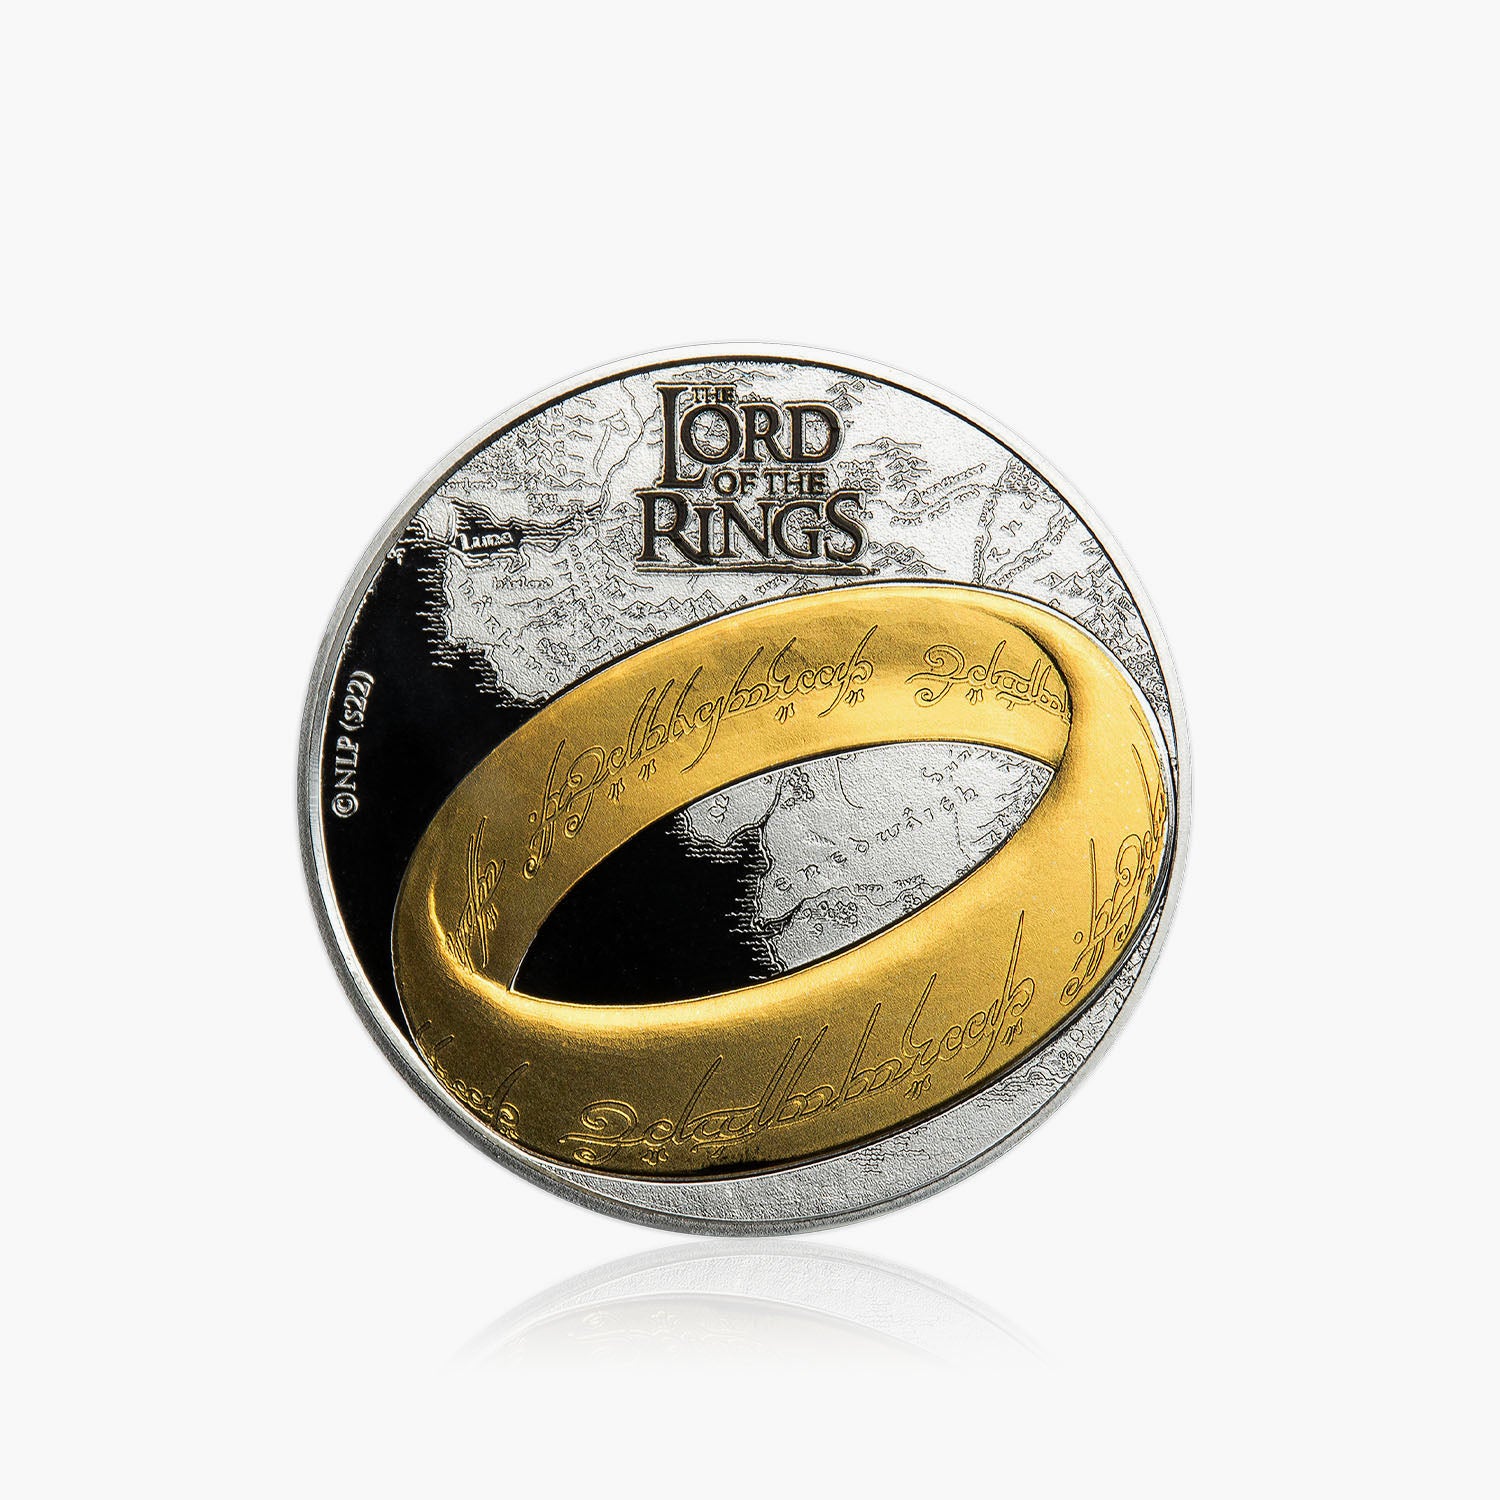 The Lord of the Rings Silver Plated Coin